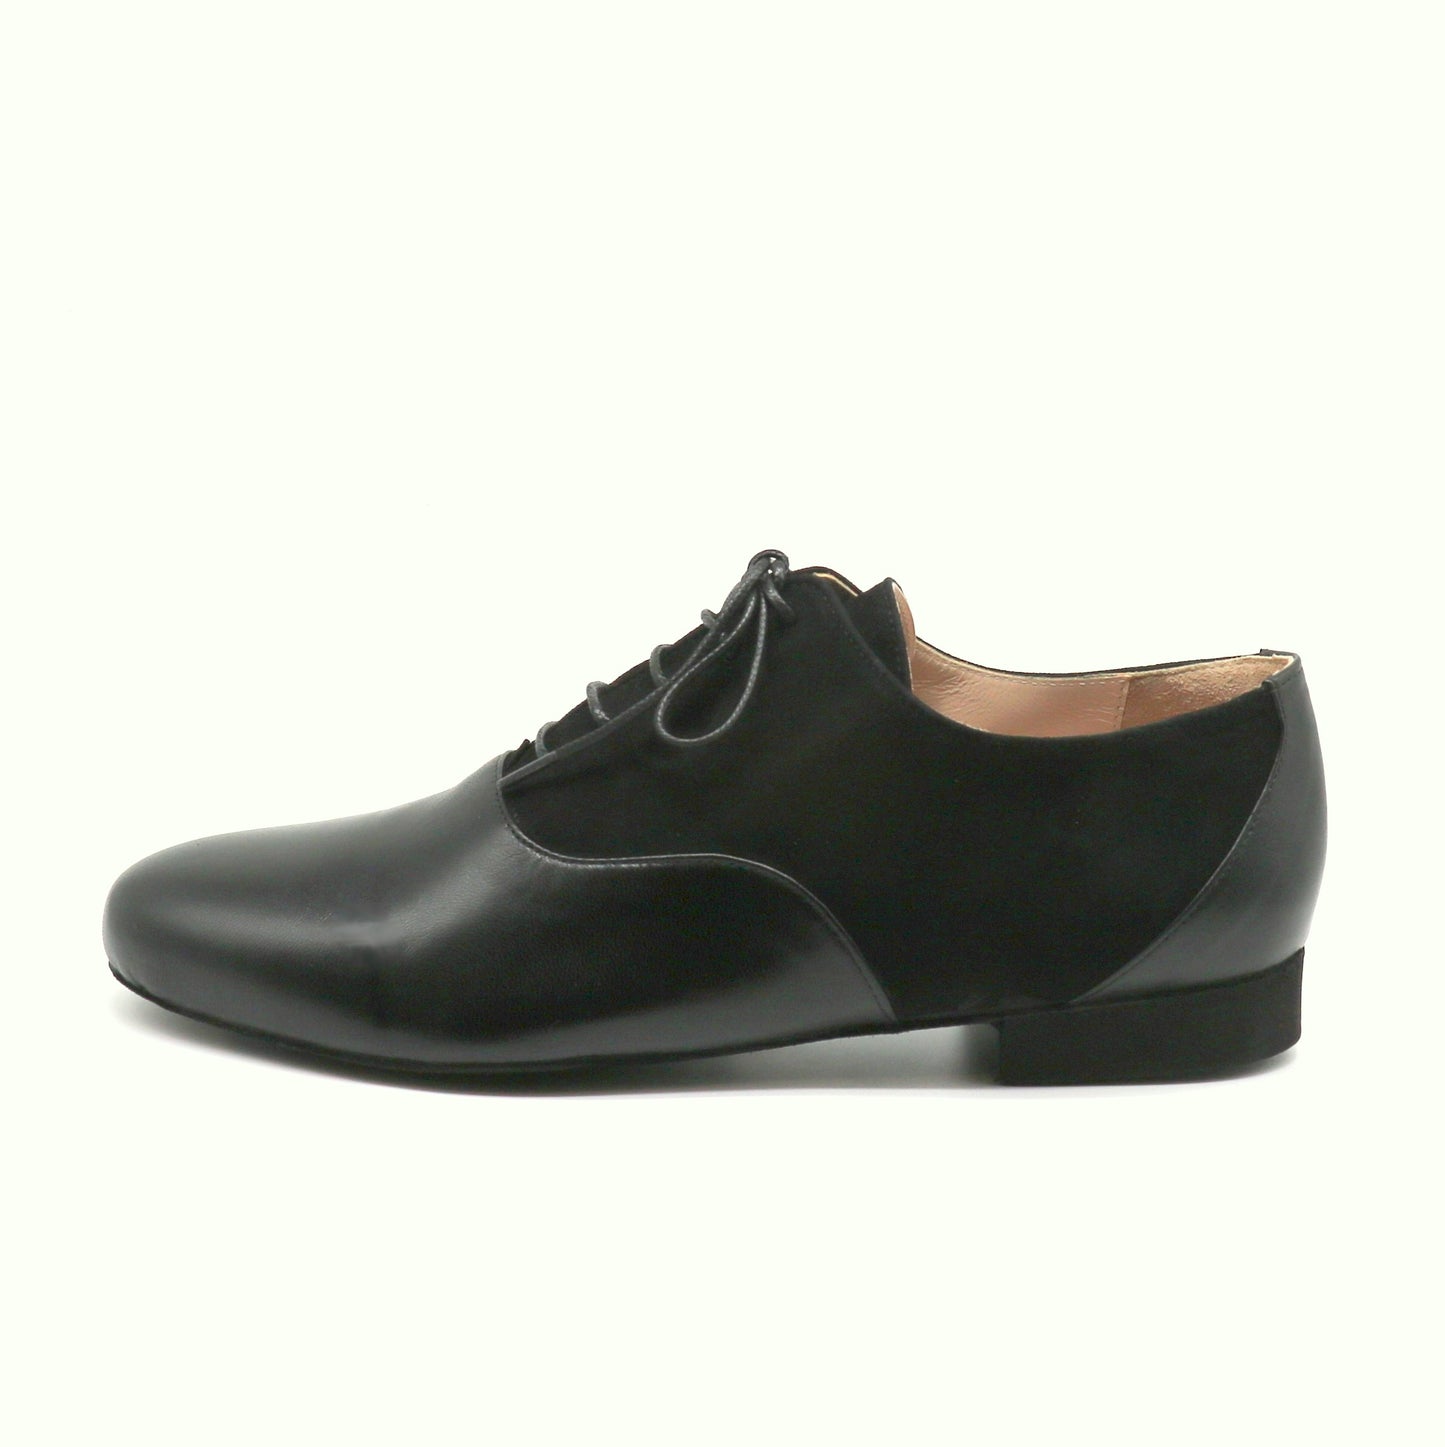 Tamango smooth black leather contrast suede dance sole